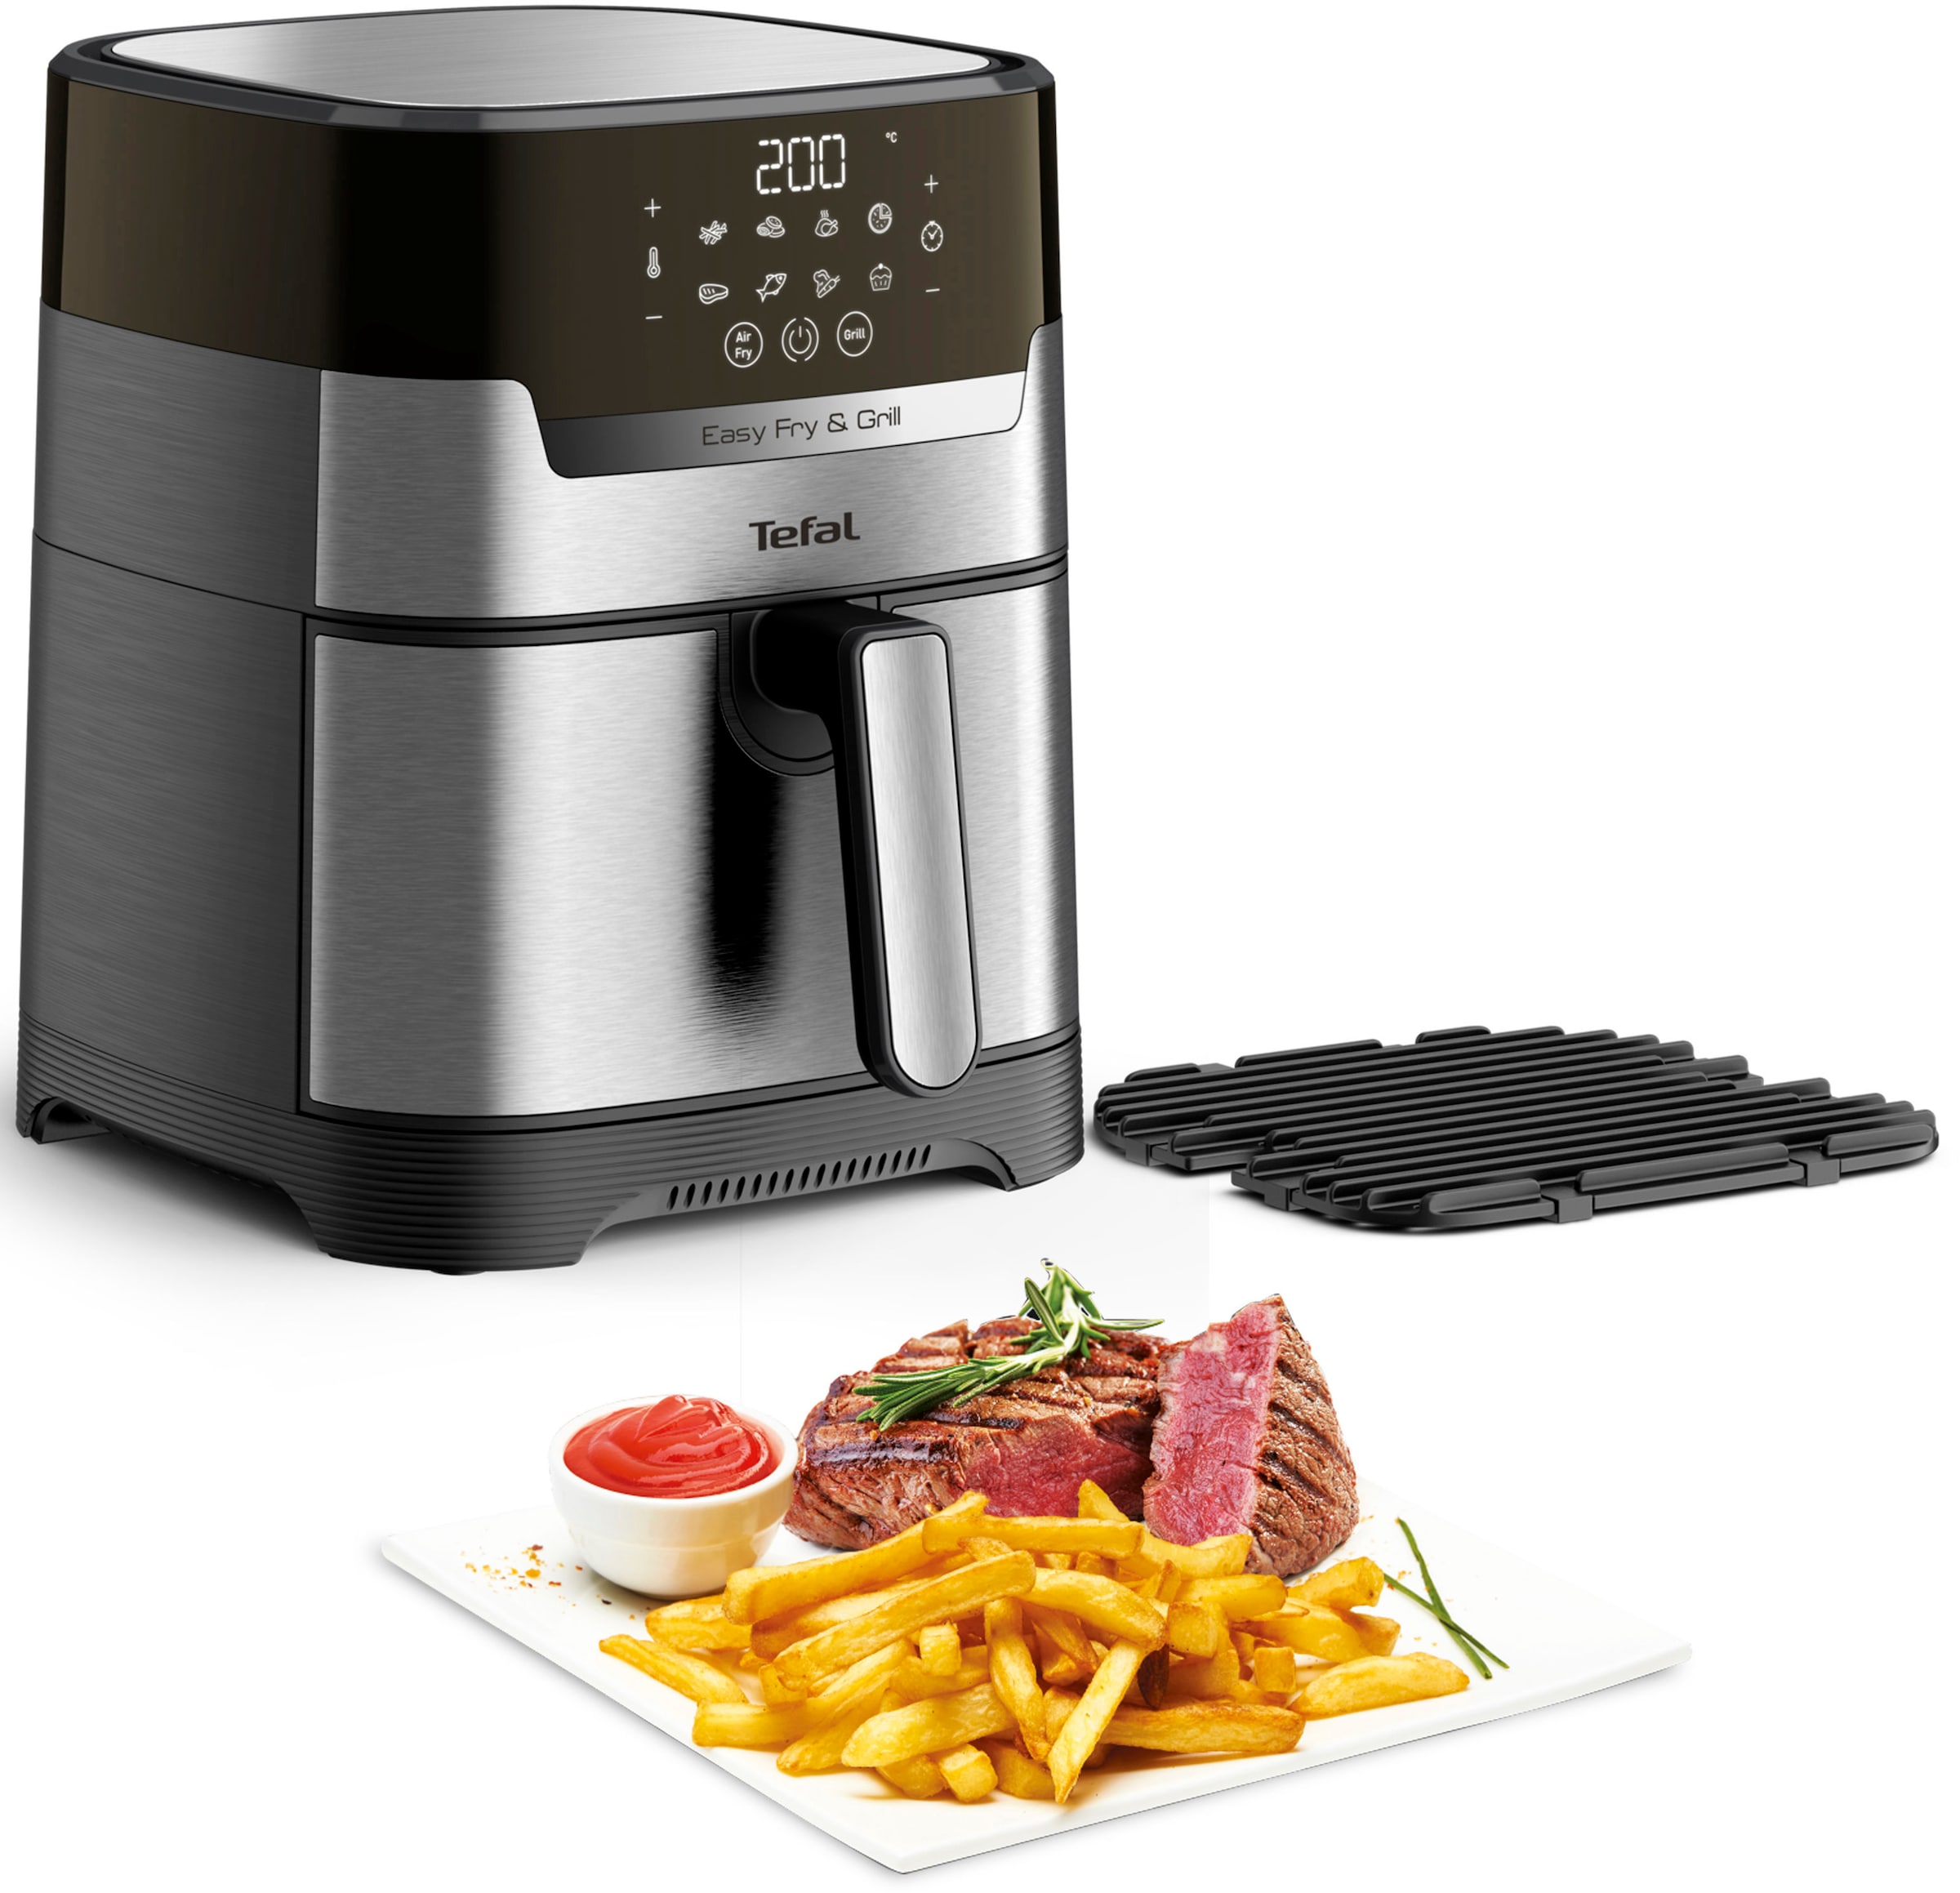 Fritteuse »EY505D Easy Fry & Grill Deluxe«, 1400 W, Heißluftfritteuse & Grill,...